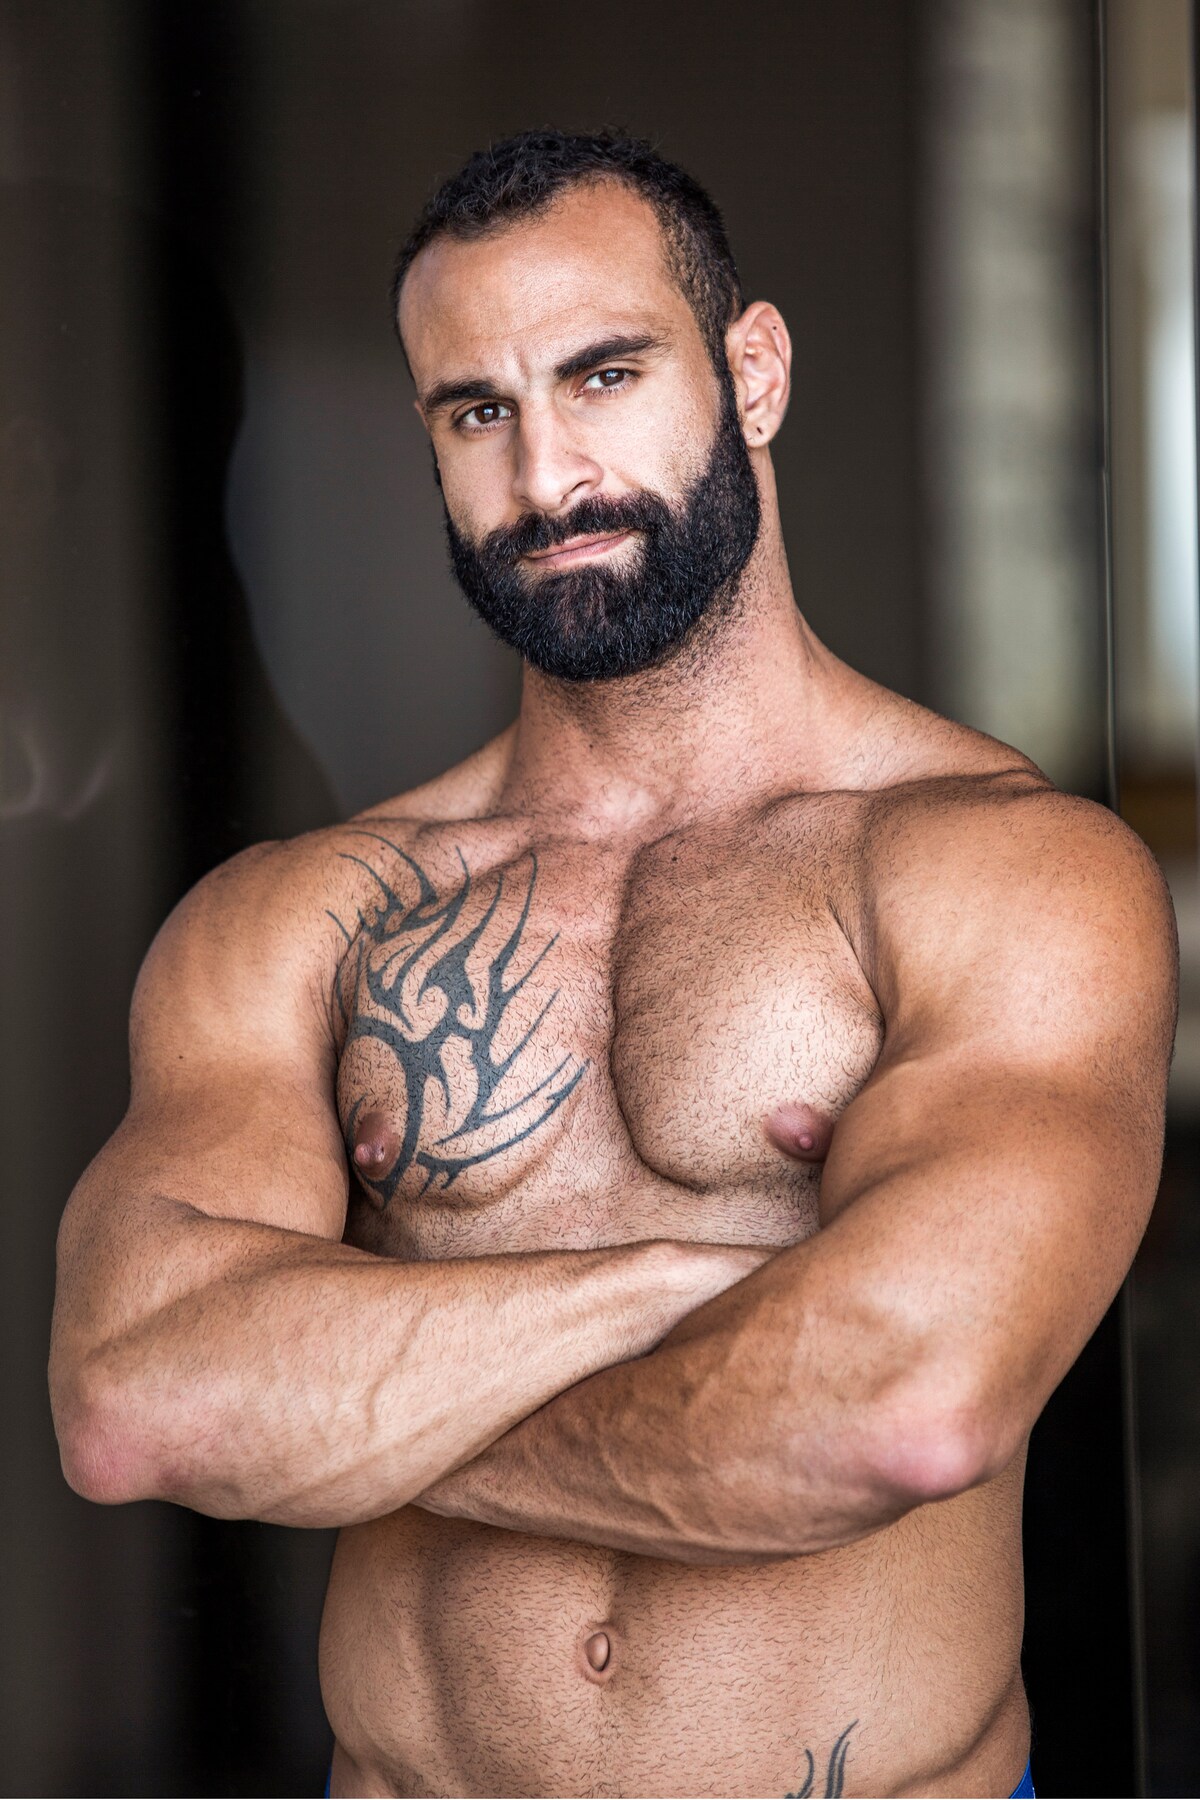 Hairy Gay Porn Actors - Paco Gallitelli - Porn Base Central, the free encyclopedia of gay porn